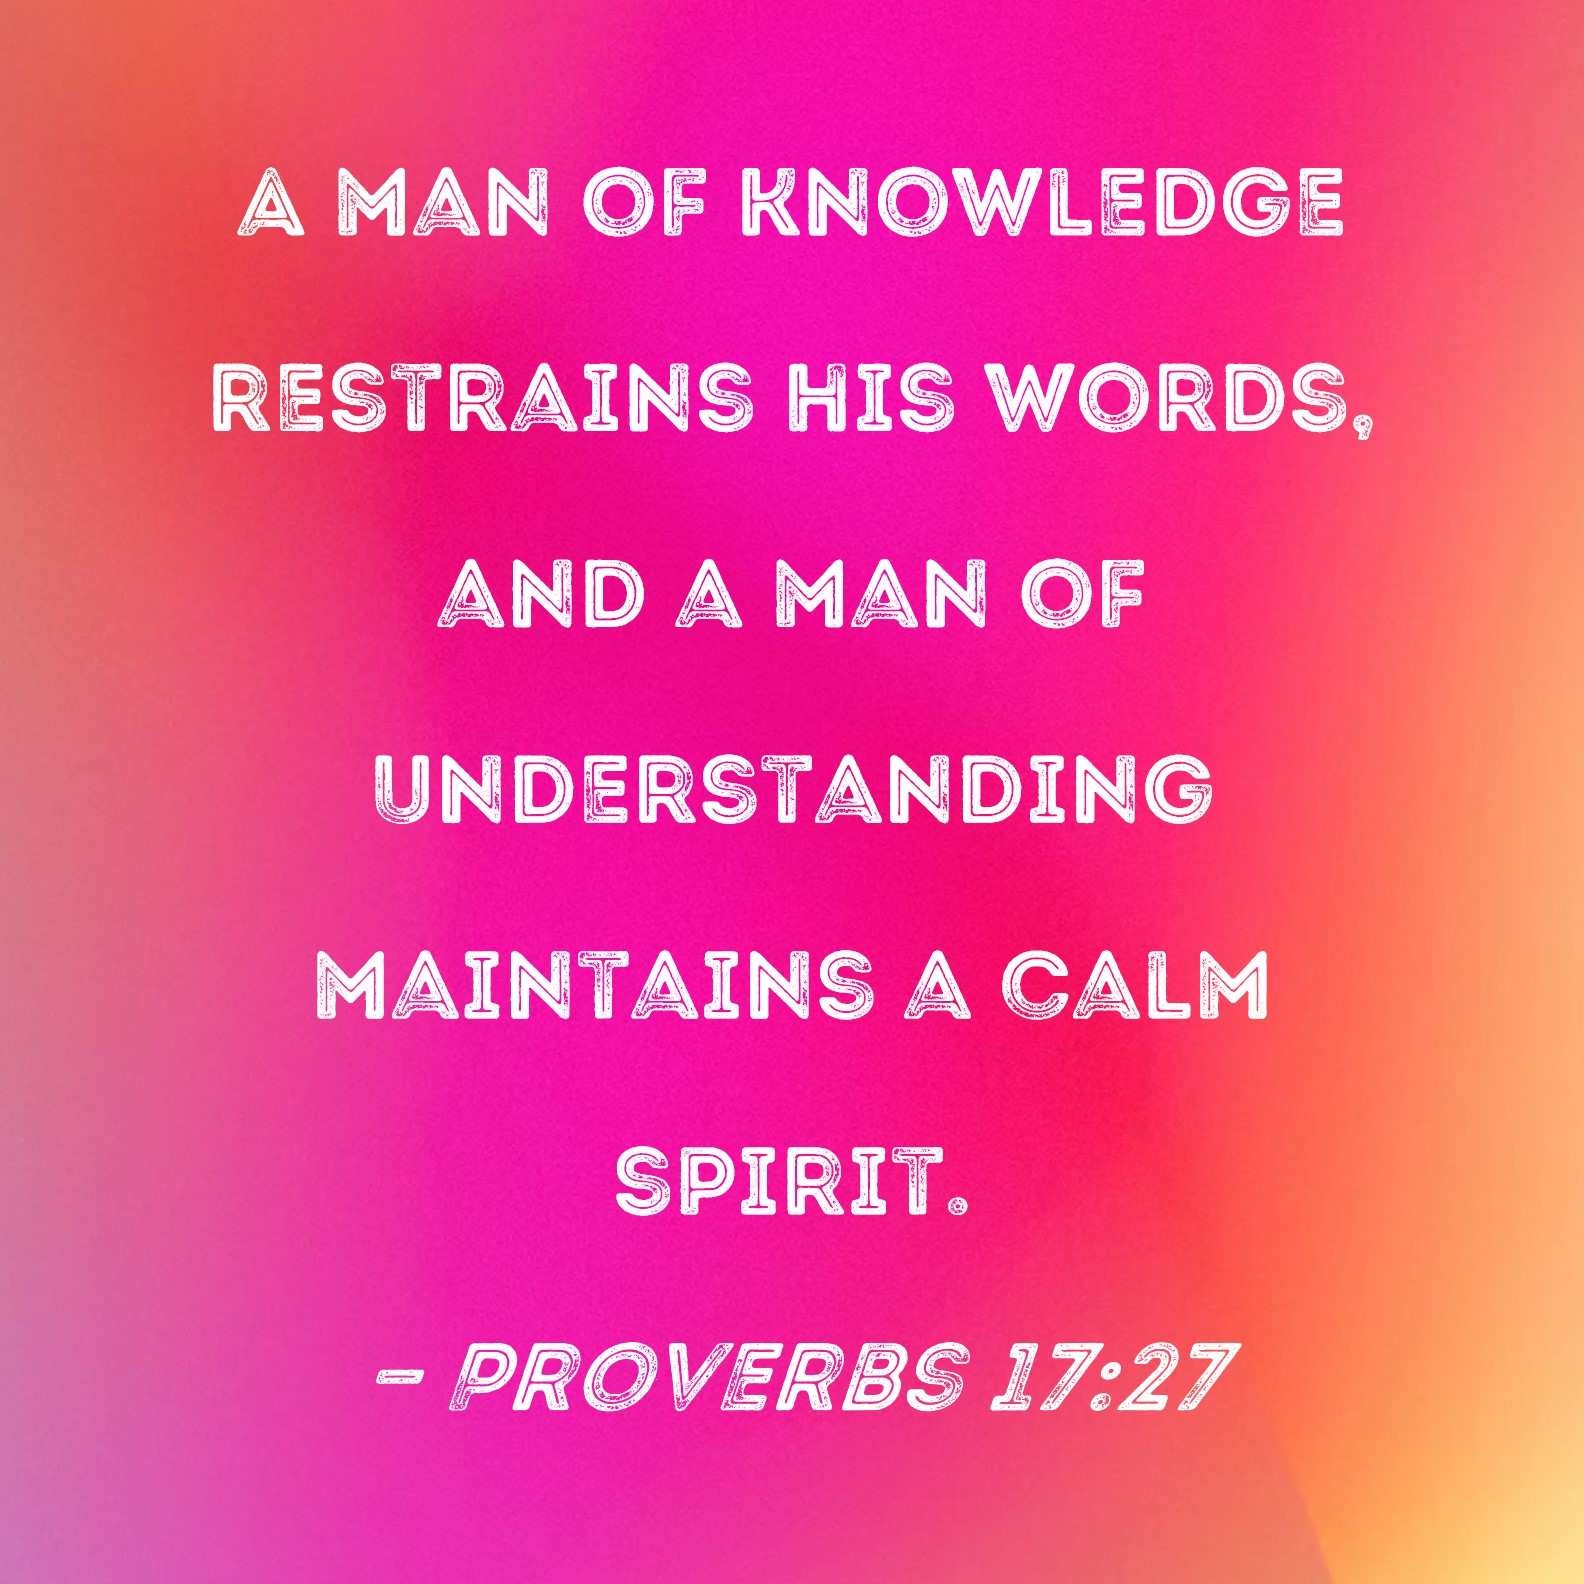 Proverbs 17:27 A man of knowledge restrains his words, and a man